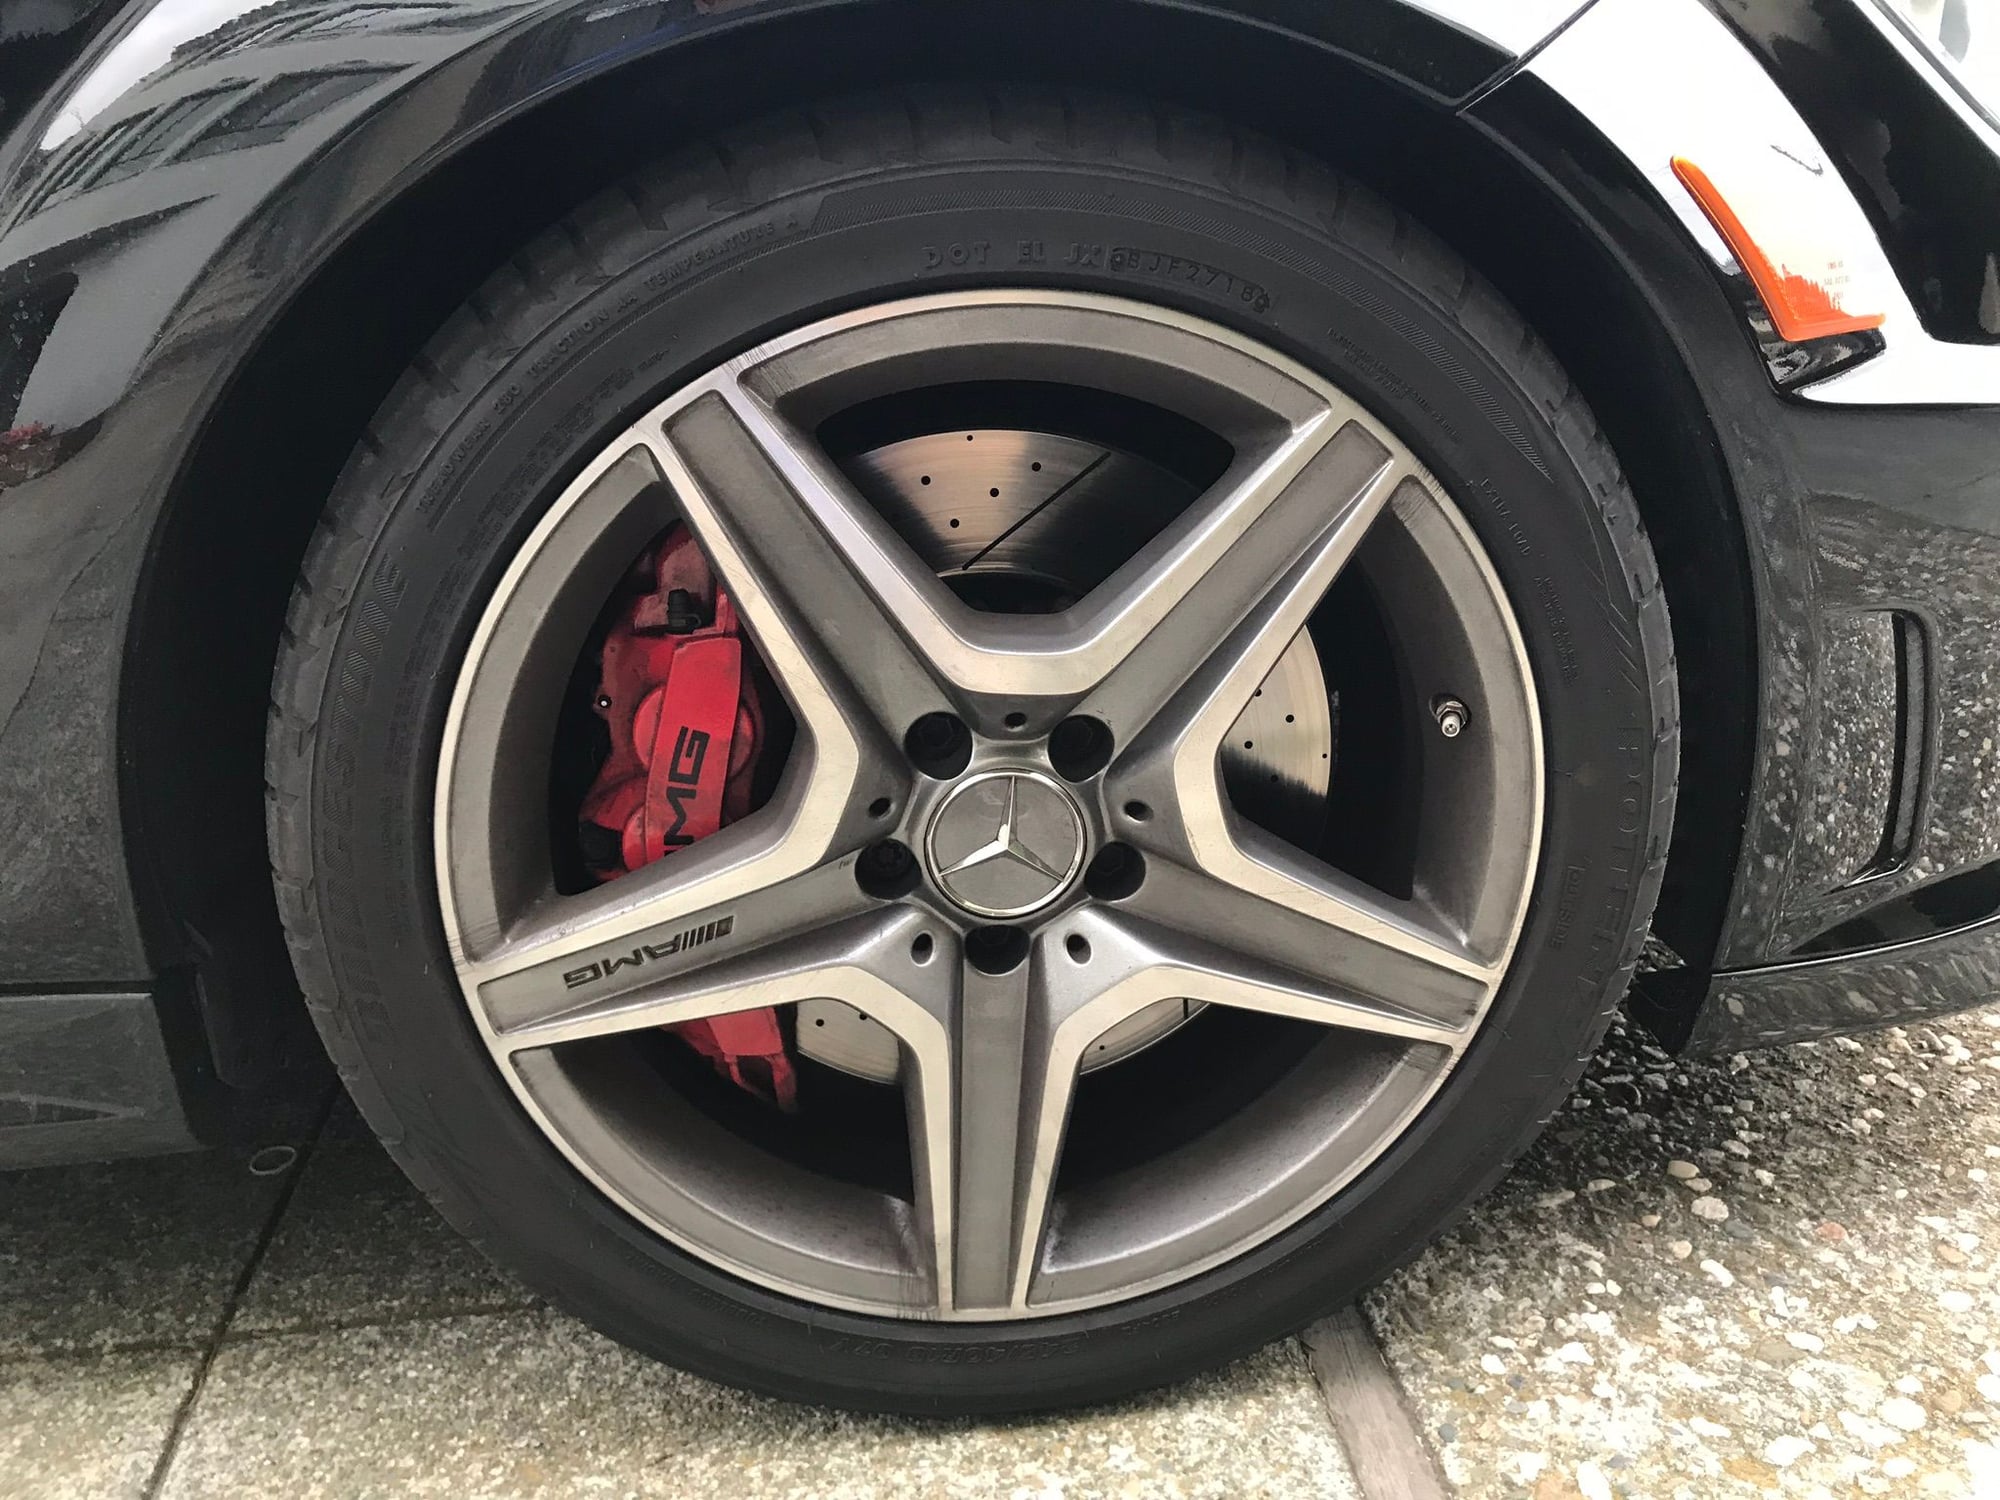 Wheels and Tires/Axles - C63 w204 OEM AMG double spoke wheel and tire set - Used - 2009 to 2014 Mercedes-Benz C63 AMG - San Francisco, CA 94116, United States